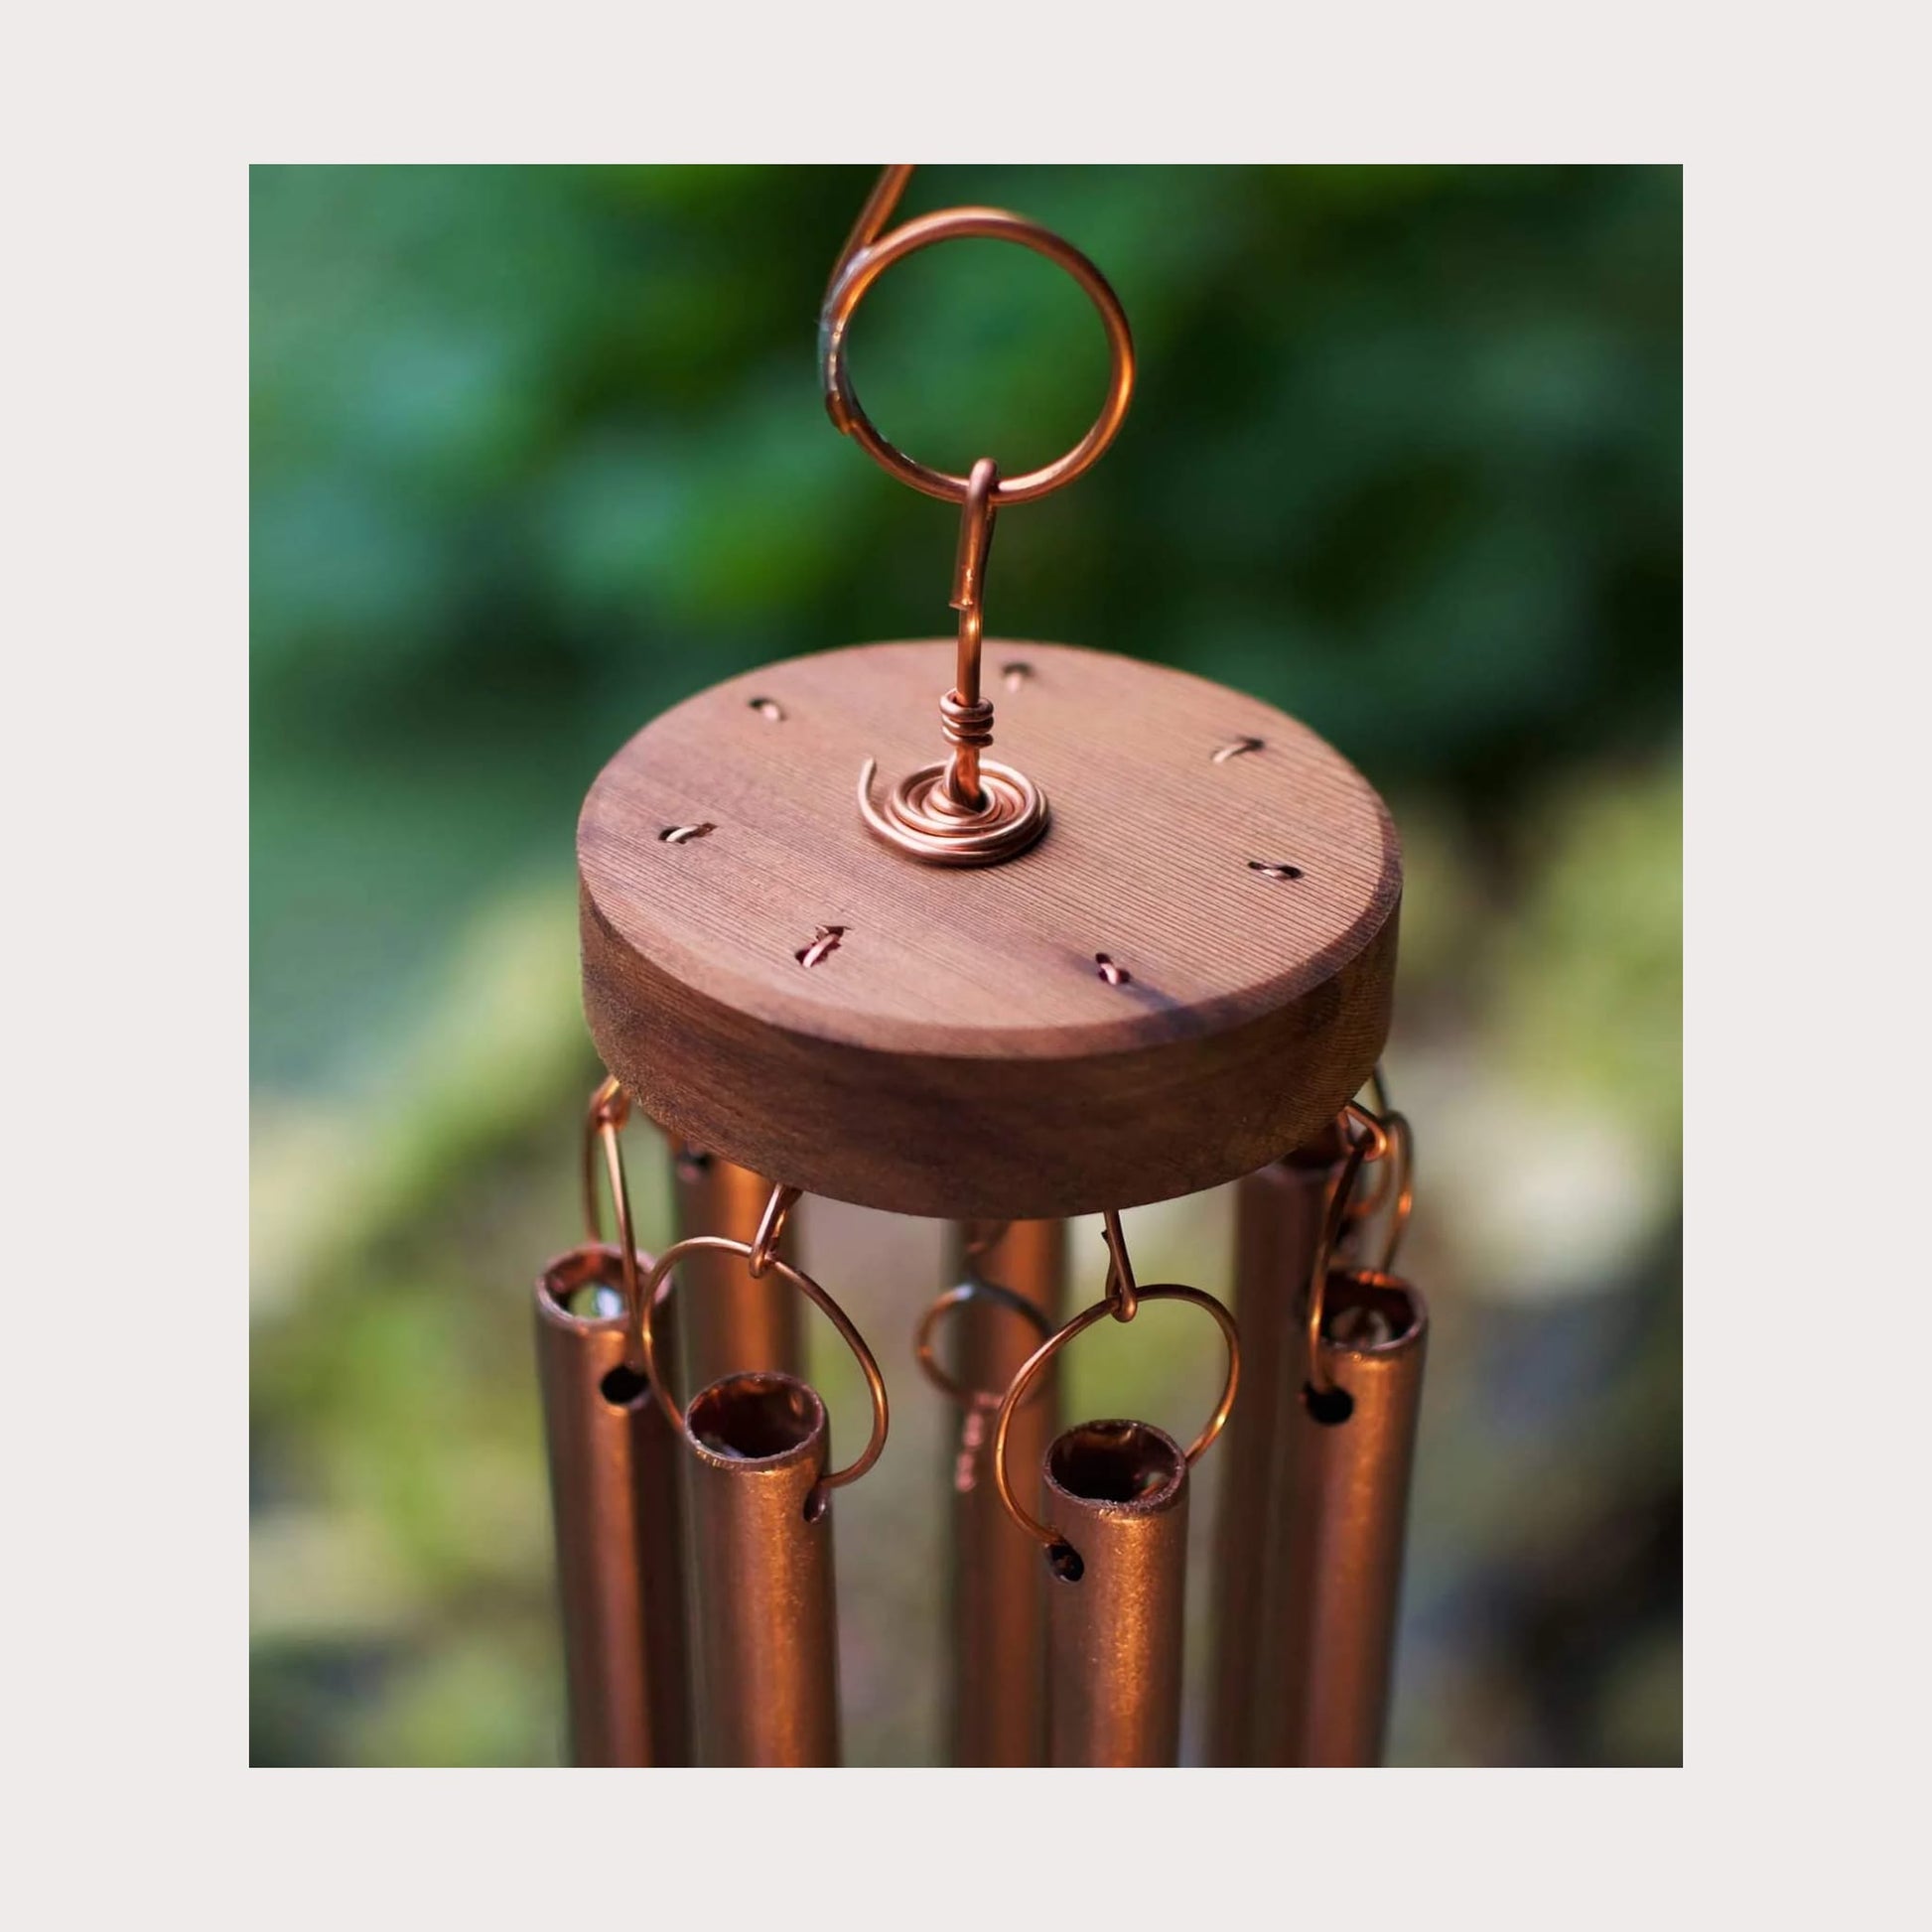 detail, copper wind chime